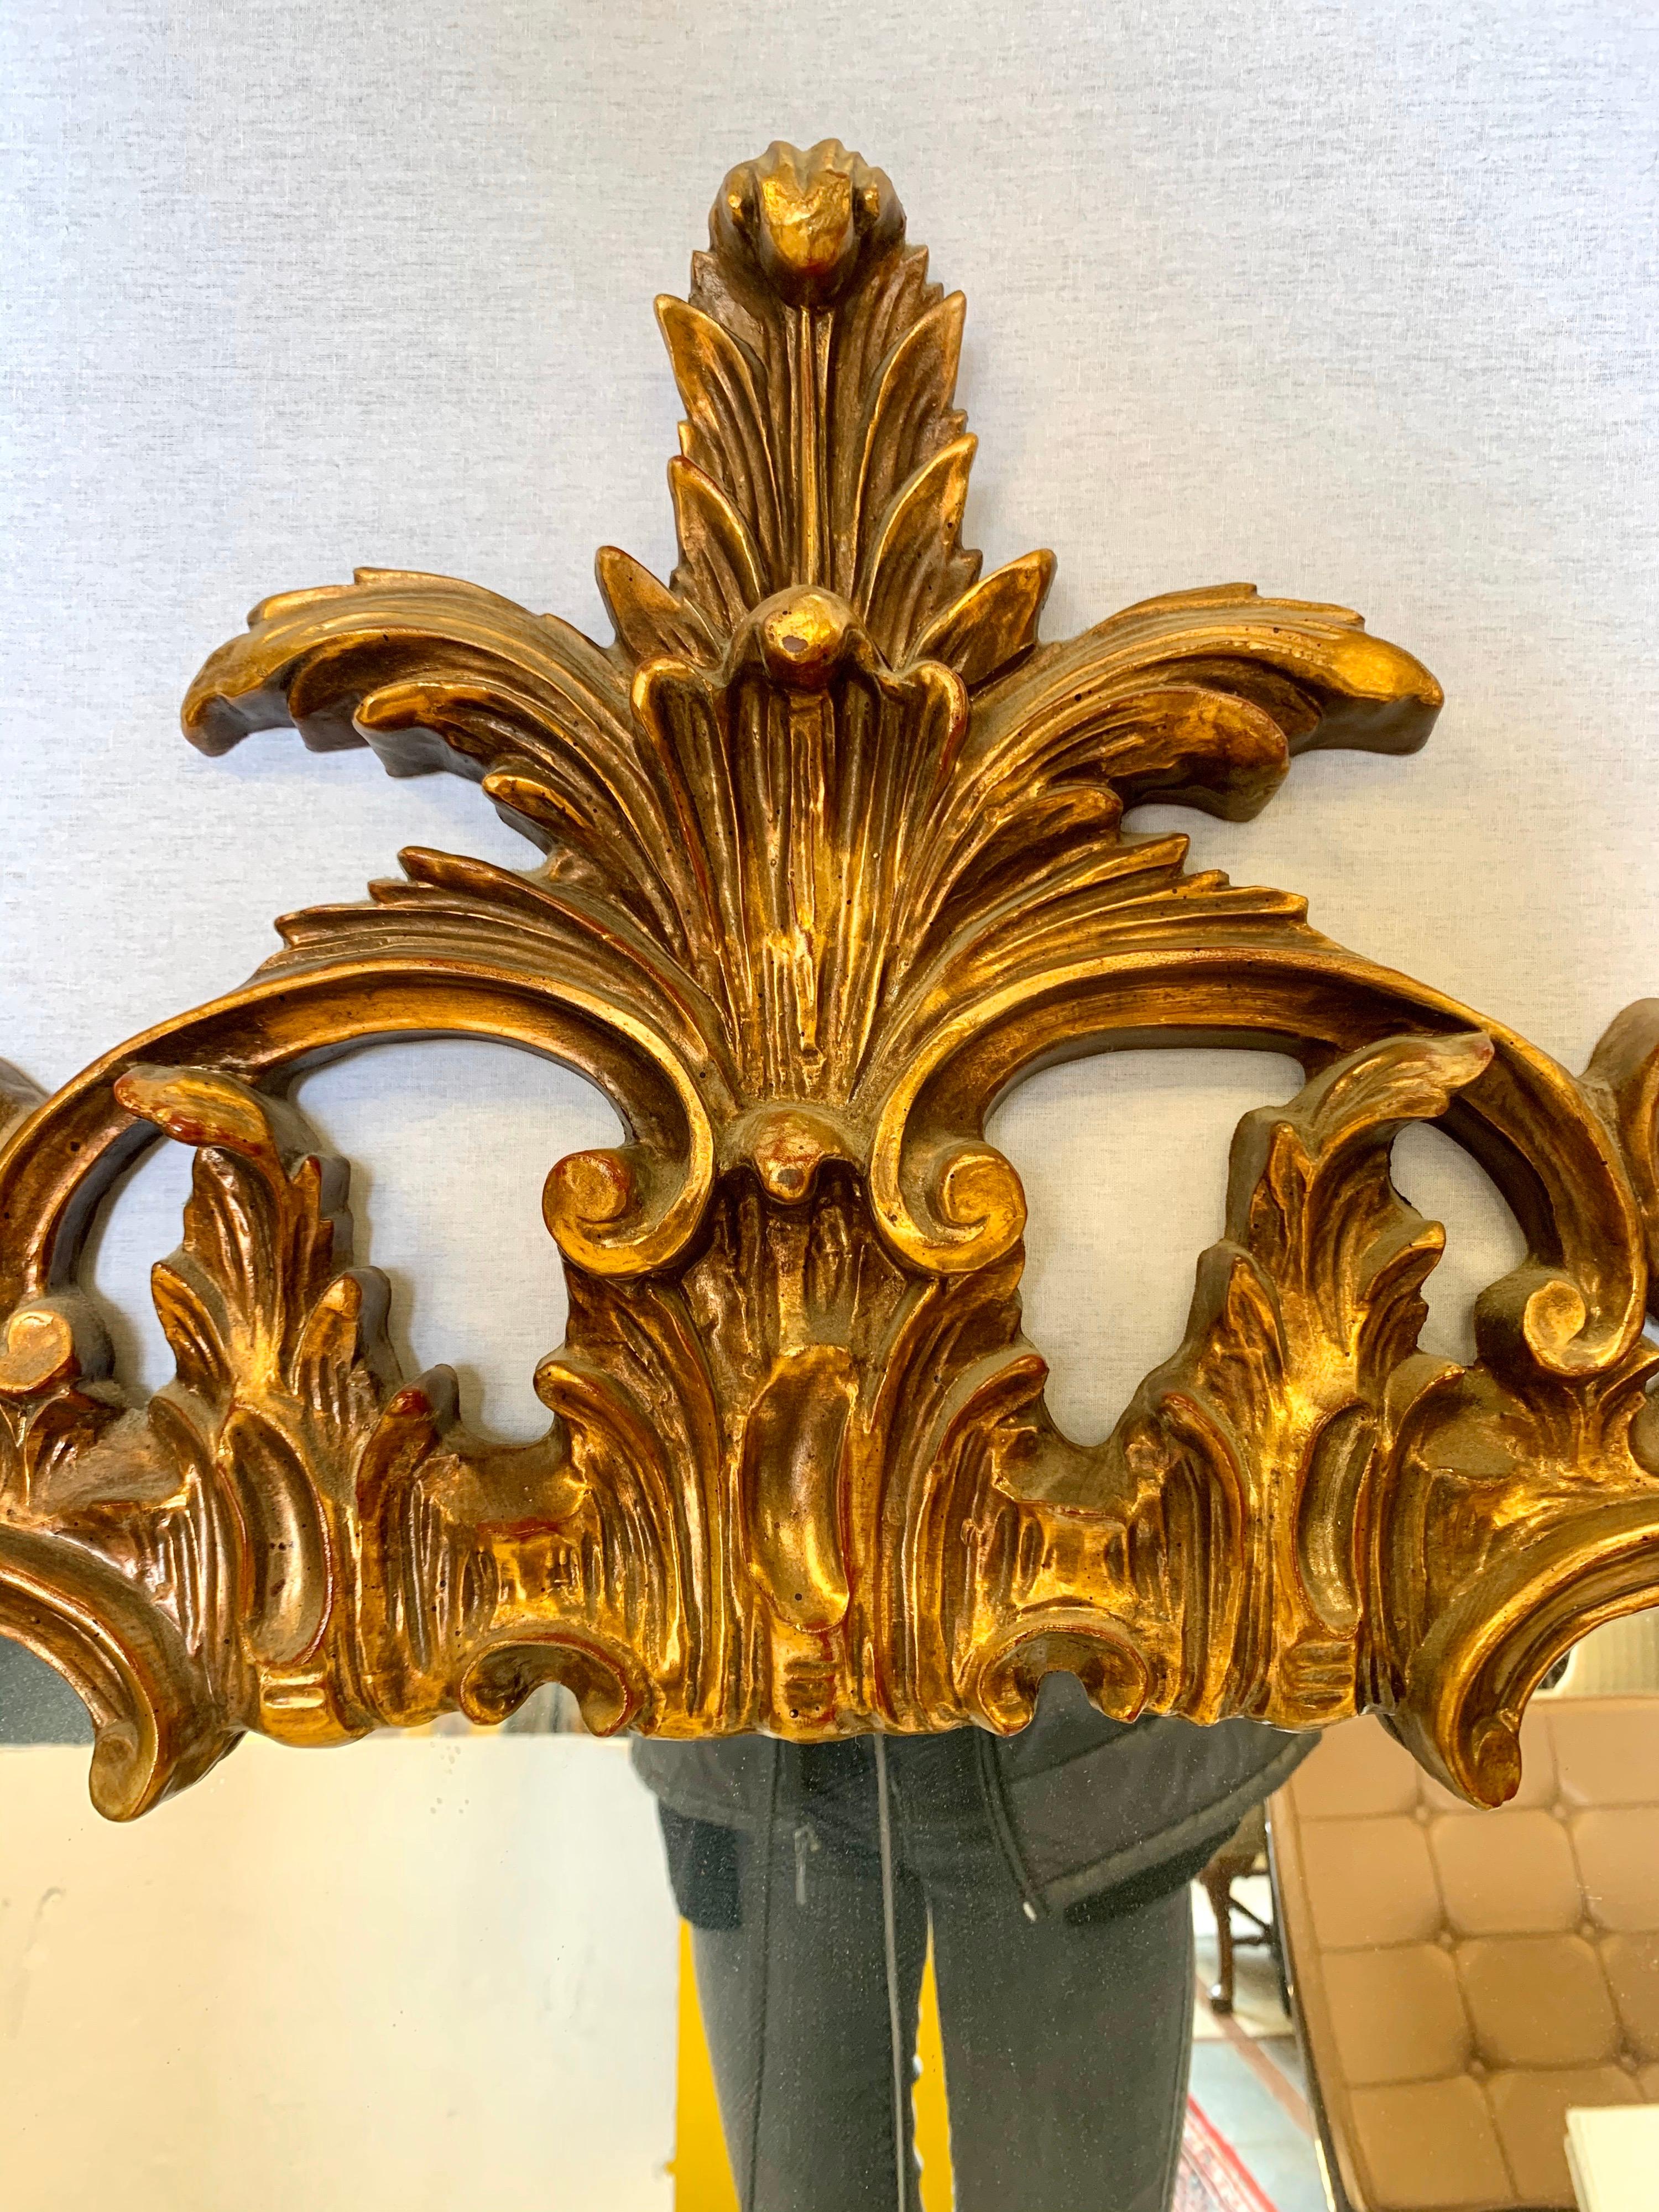 Elegant pair of tall matching giltwood mirrors with carved acanthus leaf detail and open scrollwork on top and bottom.